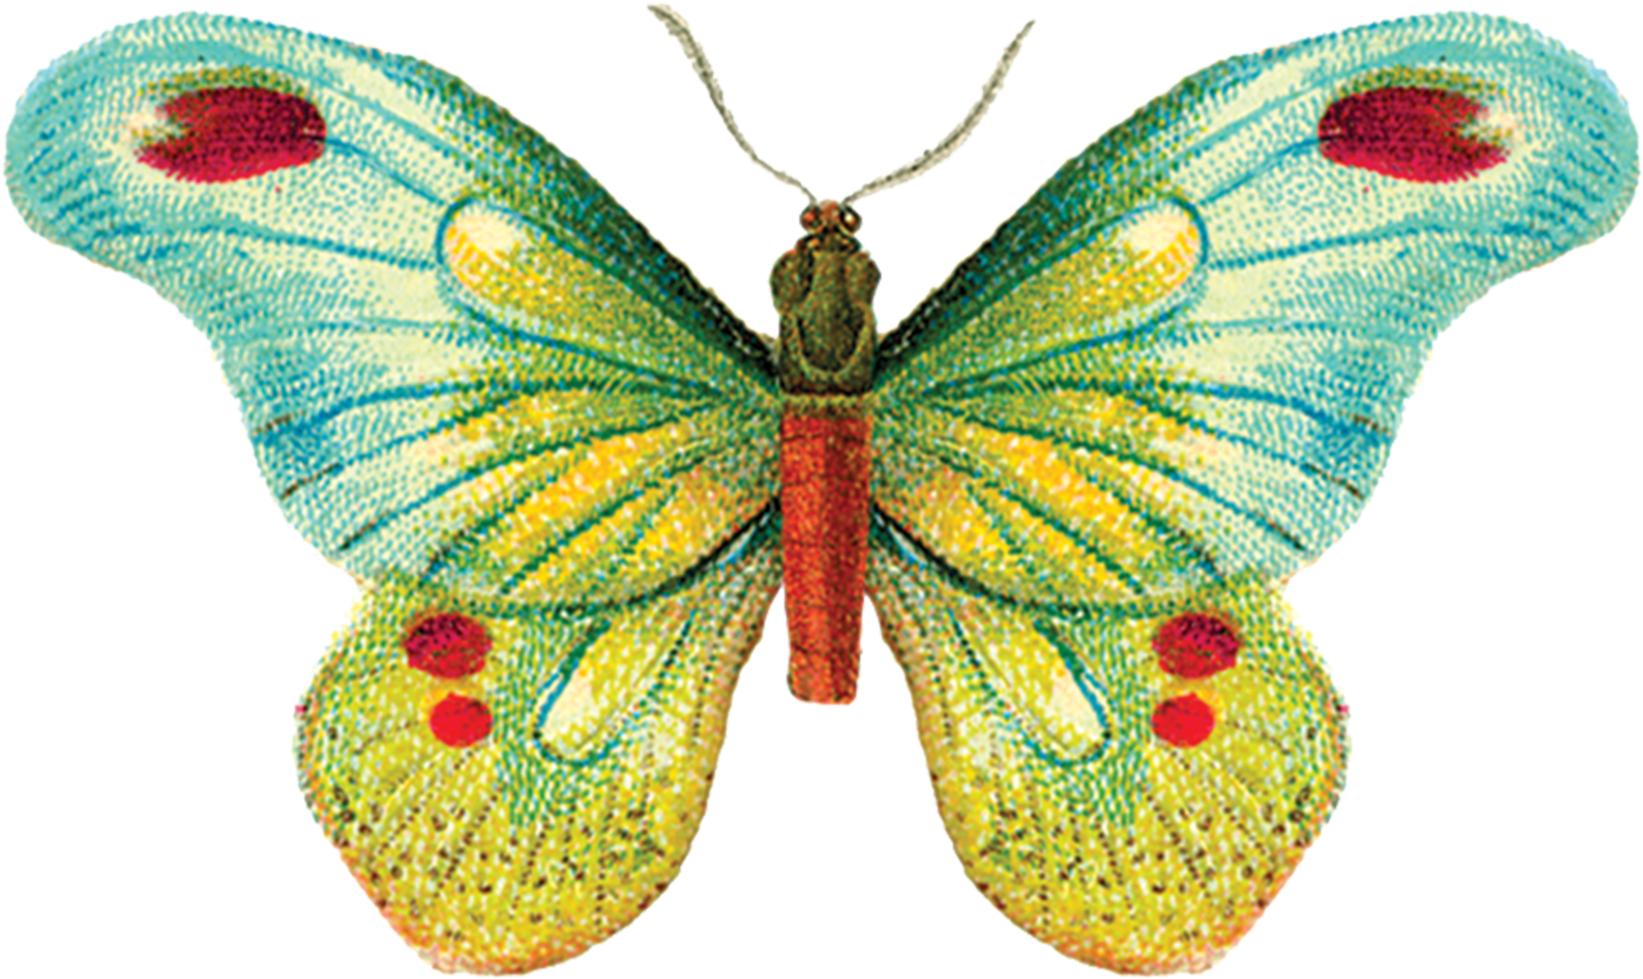 Academic textbook style illustration of a butterfly